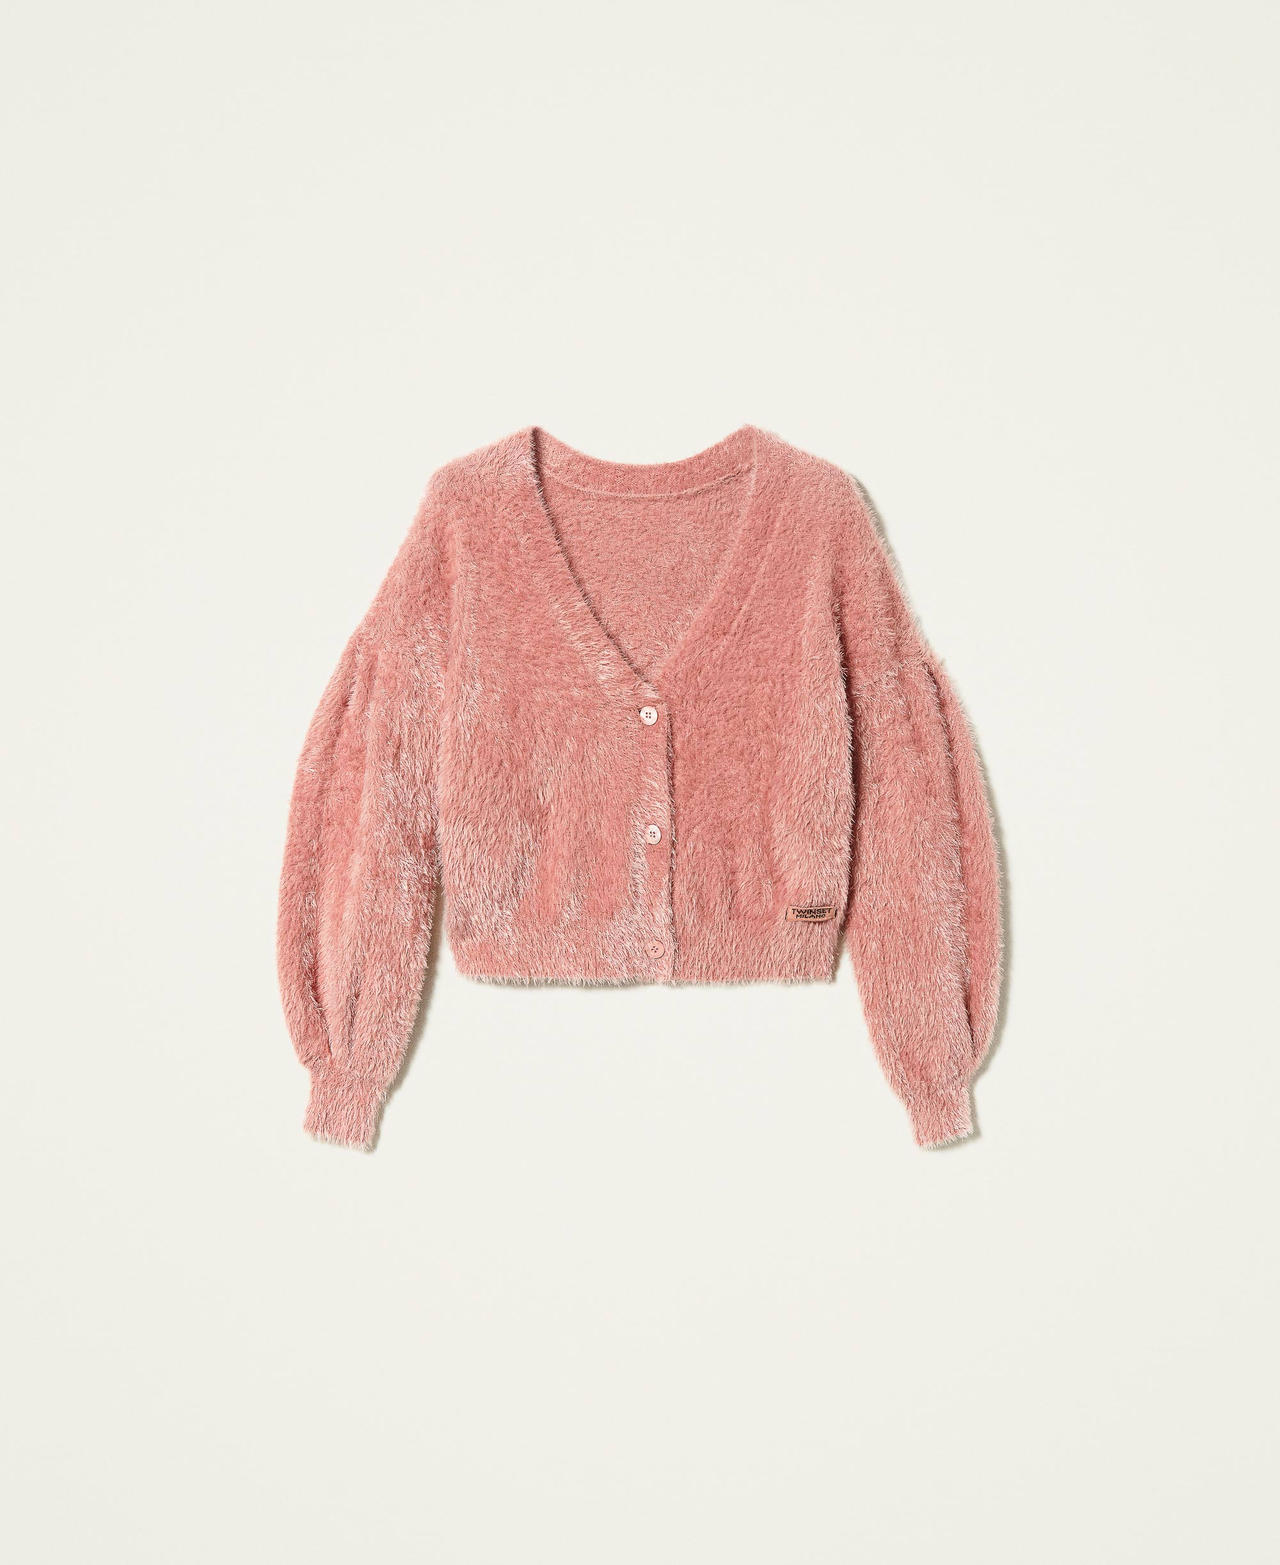 Jumper-cardigan with gathered sleeves Canyon Pink Woman 212TP3010-0S